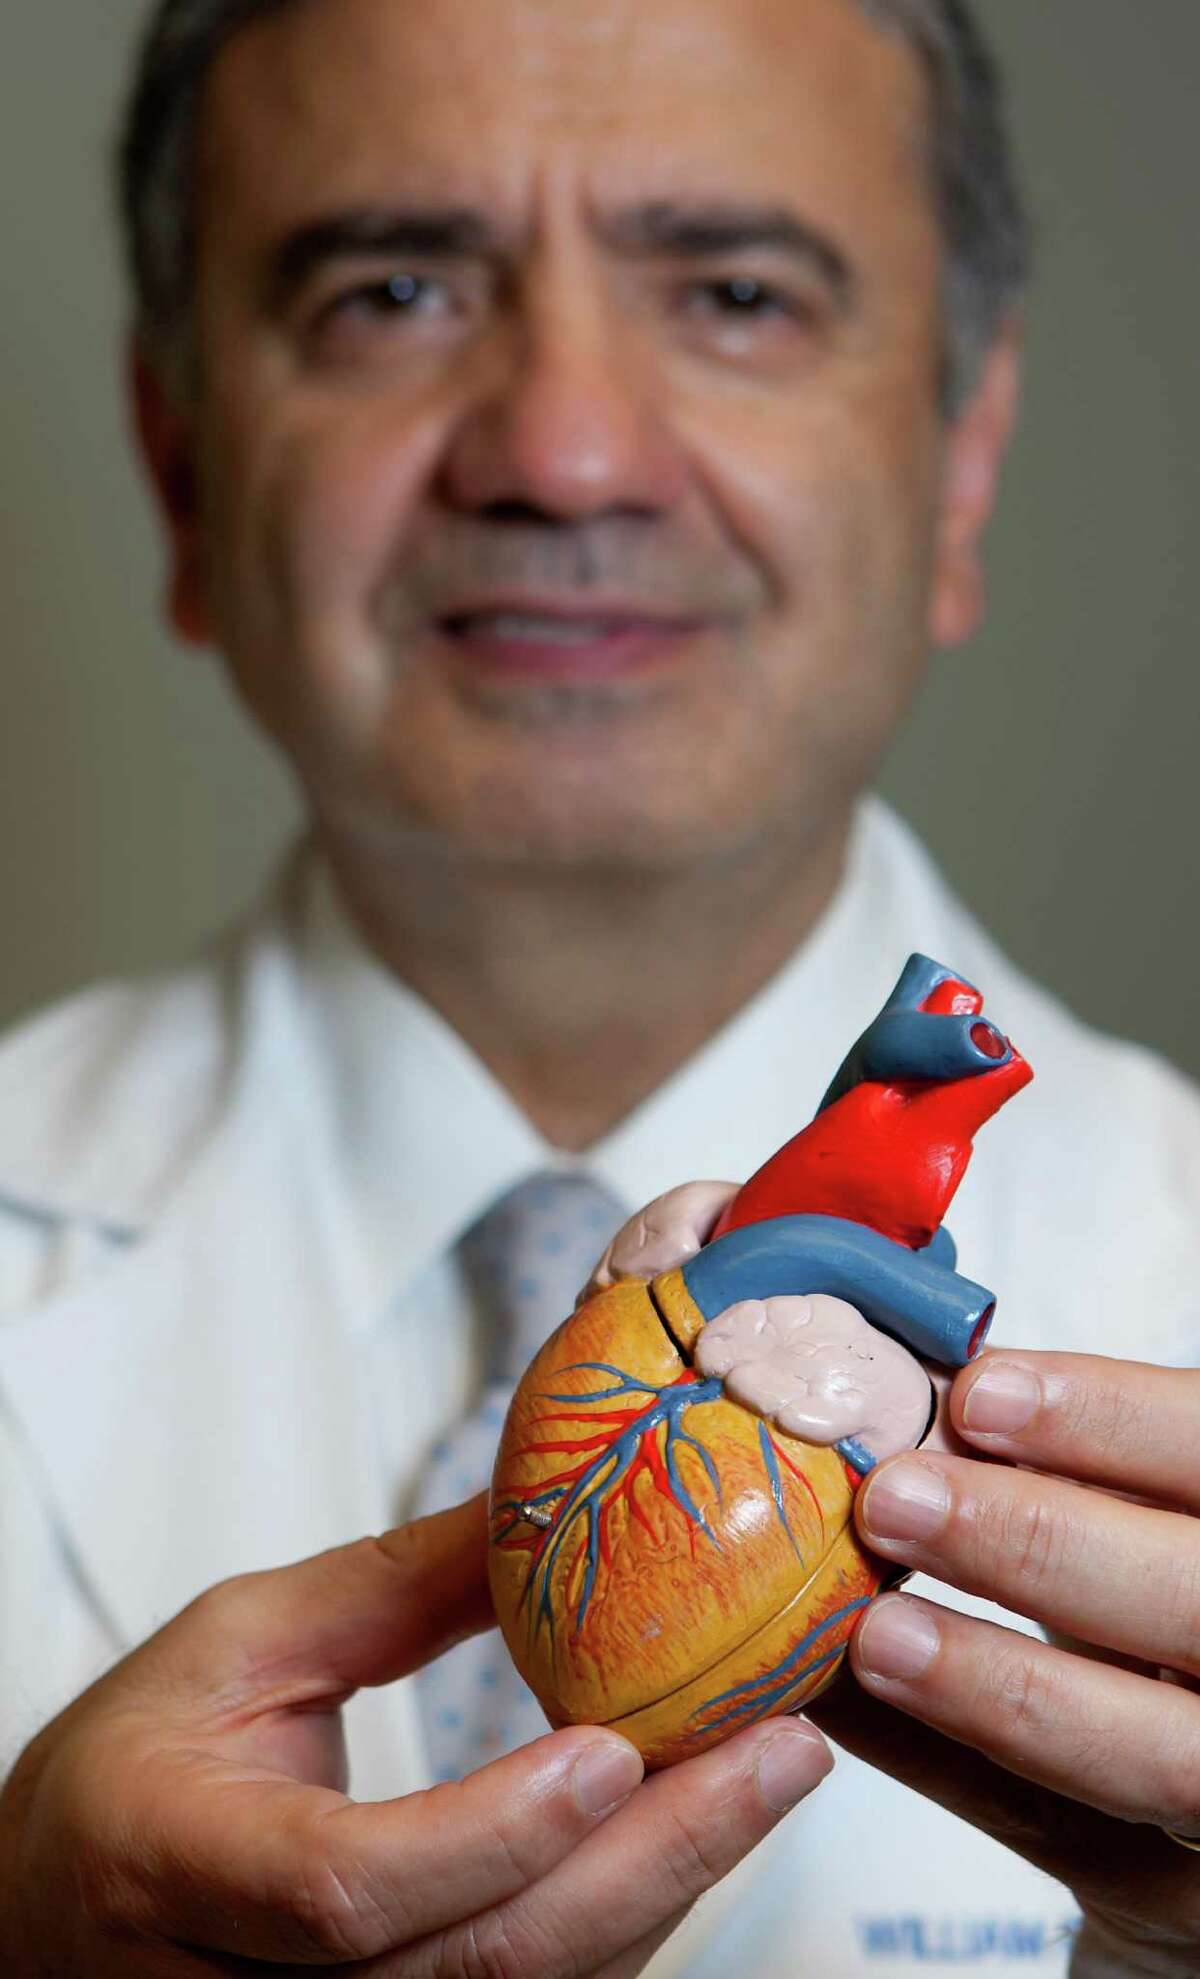 Dr. William Zoghbi is a cardiologist and the former president of the American College of Cardiology, a group that recently recommended that statins - cholesterol-lowering drugs - be offered to a wider pool of people. Dr. William Zoghbi is a cardiologist and the former president of the American College of Cardiology, a group that recently recommended that statins - cholesterol-lowering drugs - be offered to a wider pool of people.